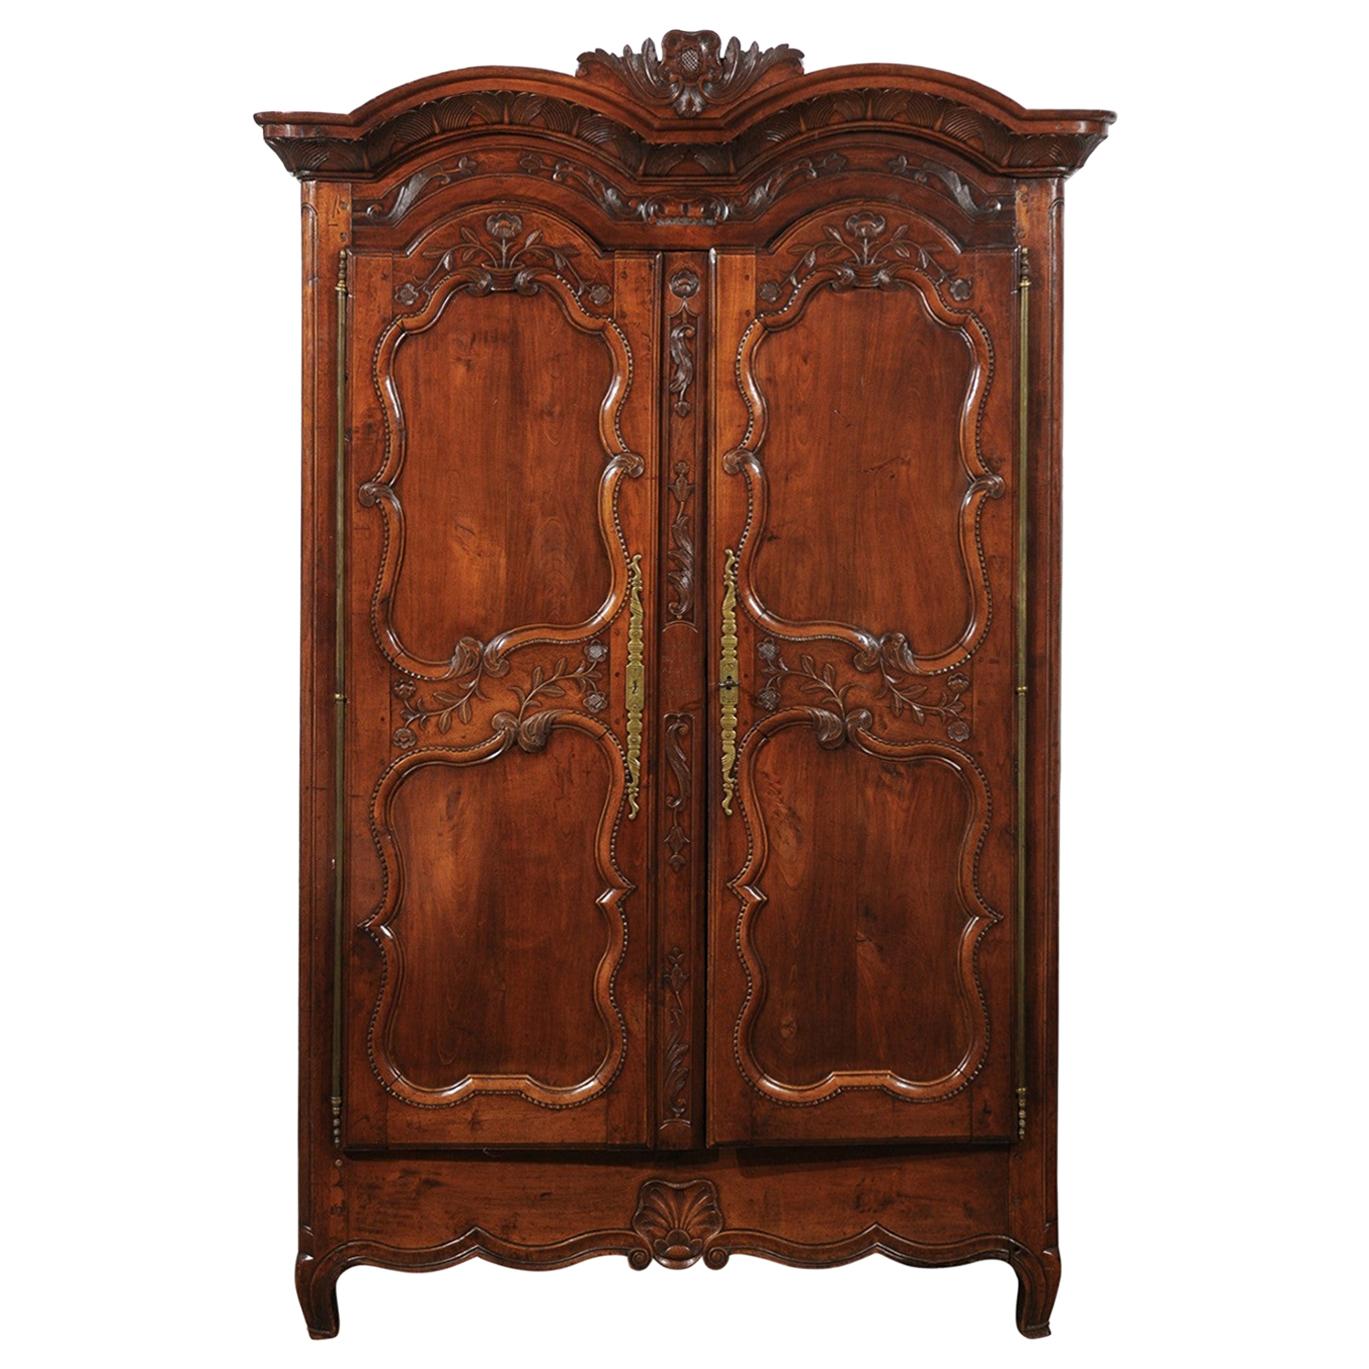 French Early 19th Century Cherry Armoire from Rennes Brittany with Carved Motifs